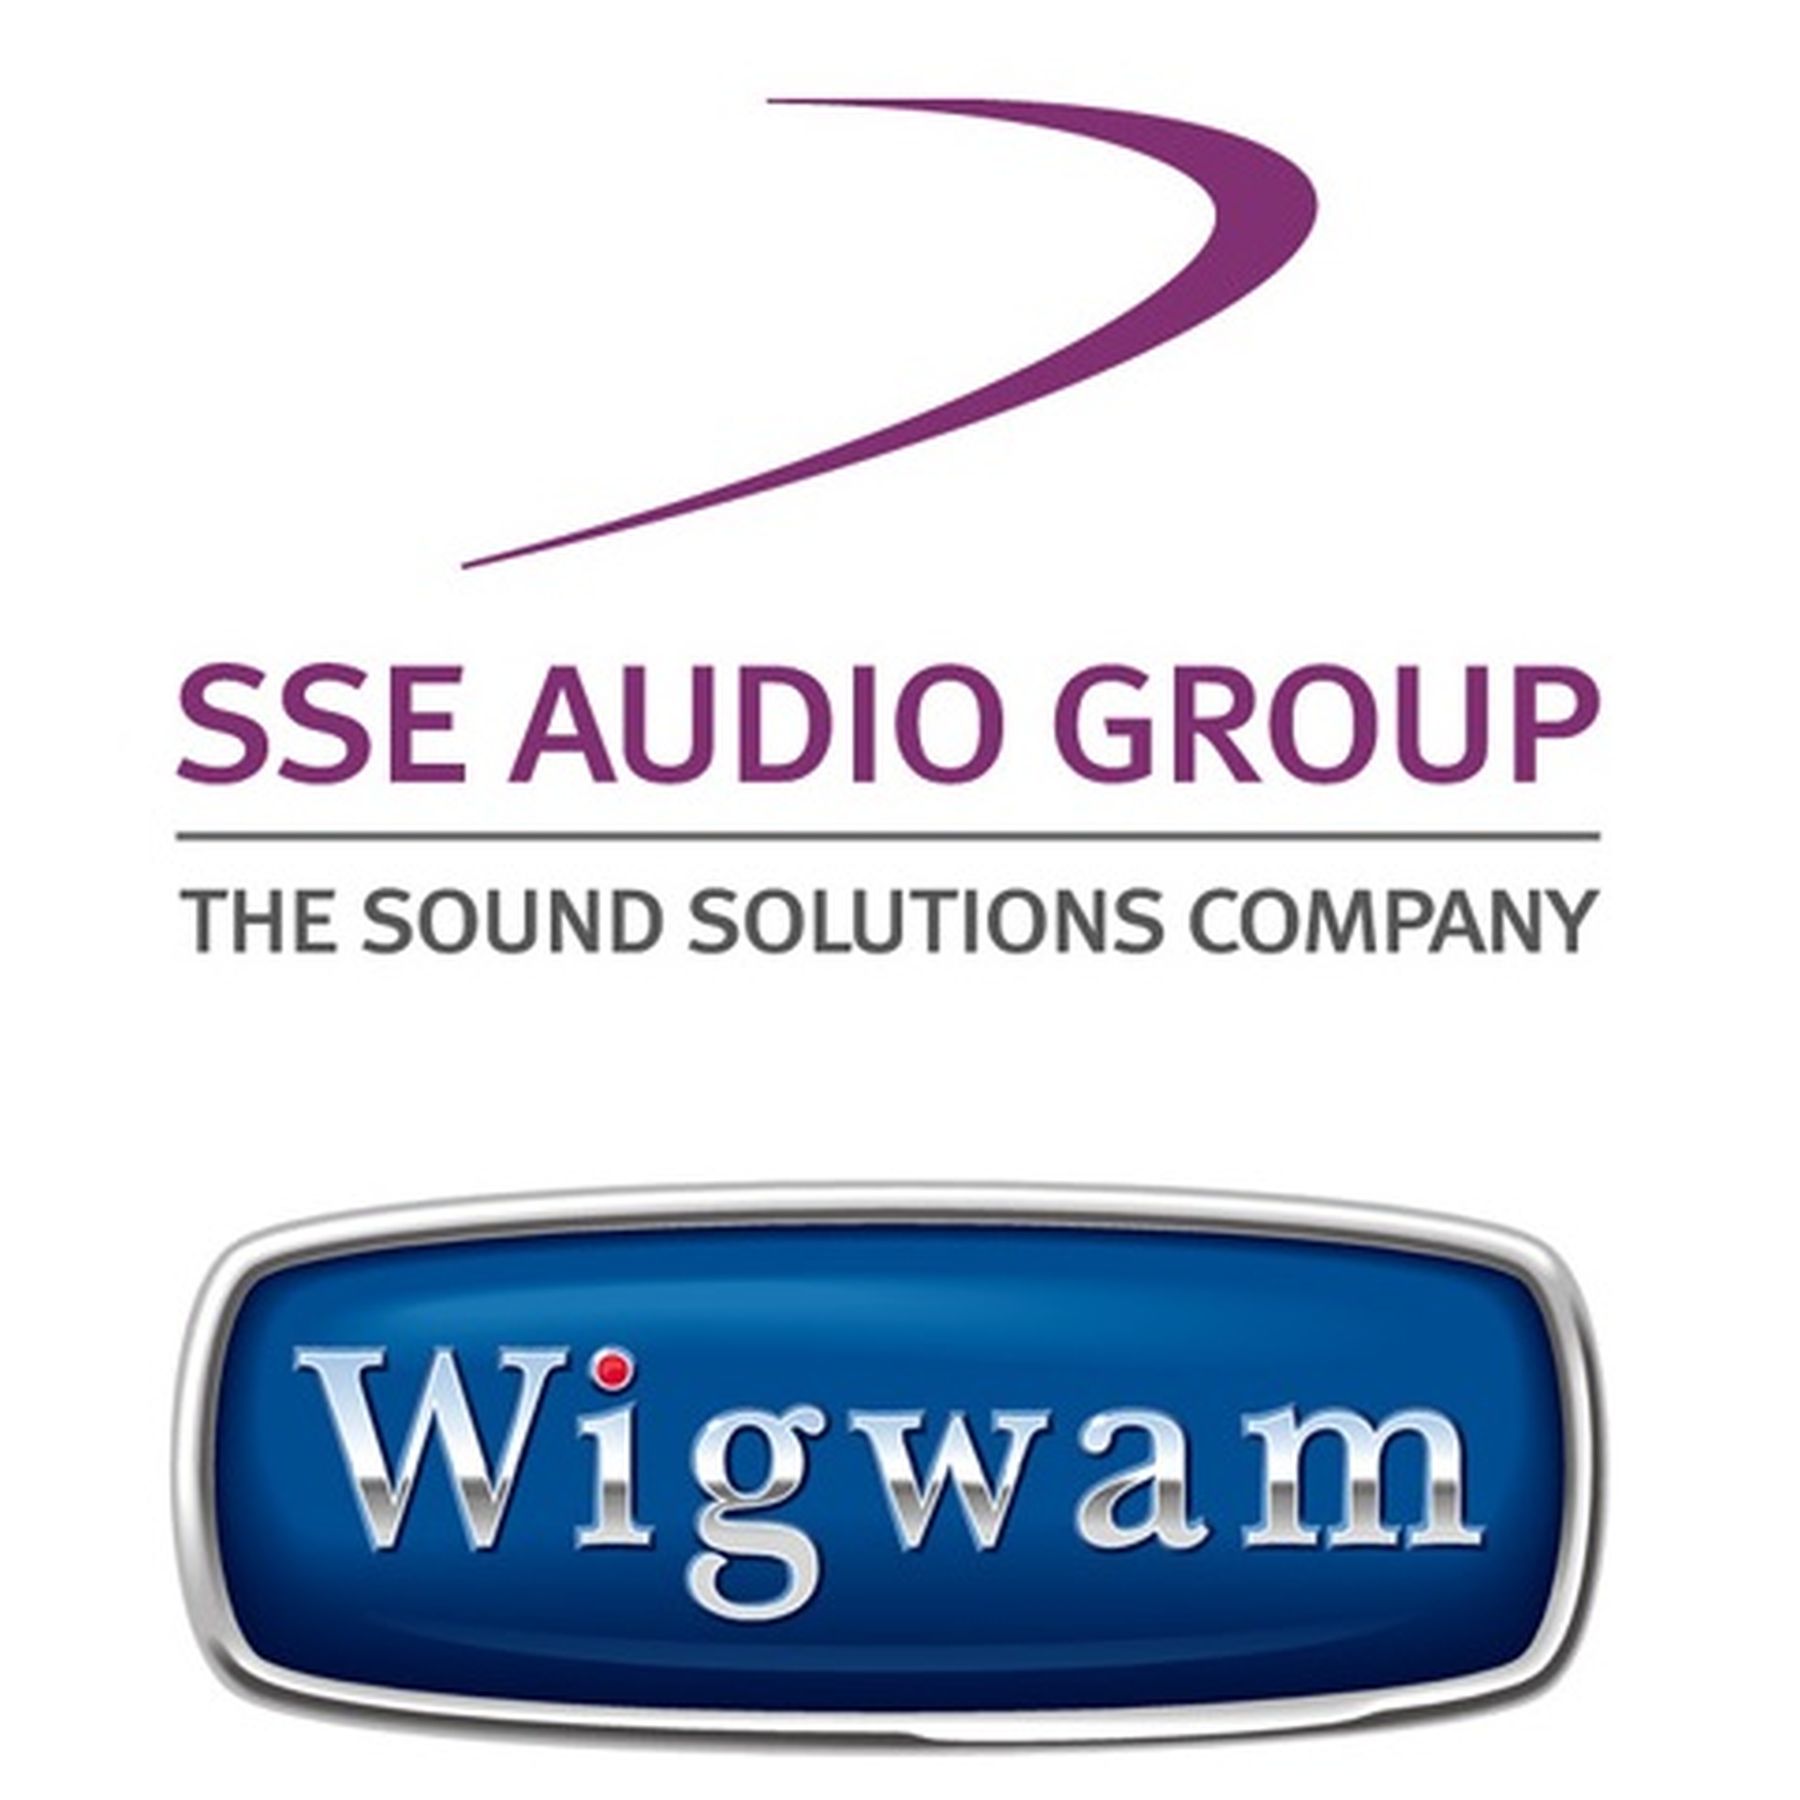 SSE Audio Group and Wigwam